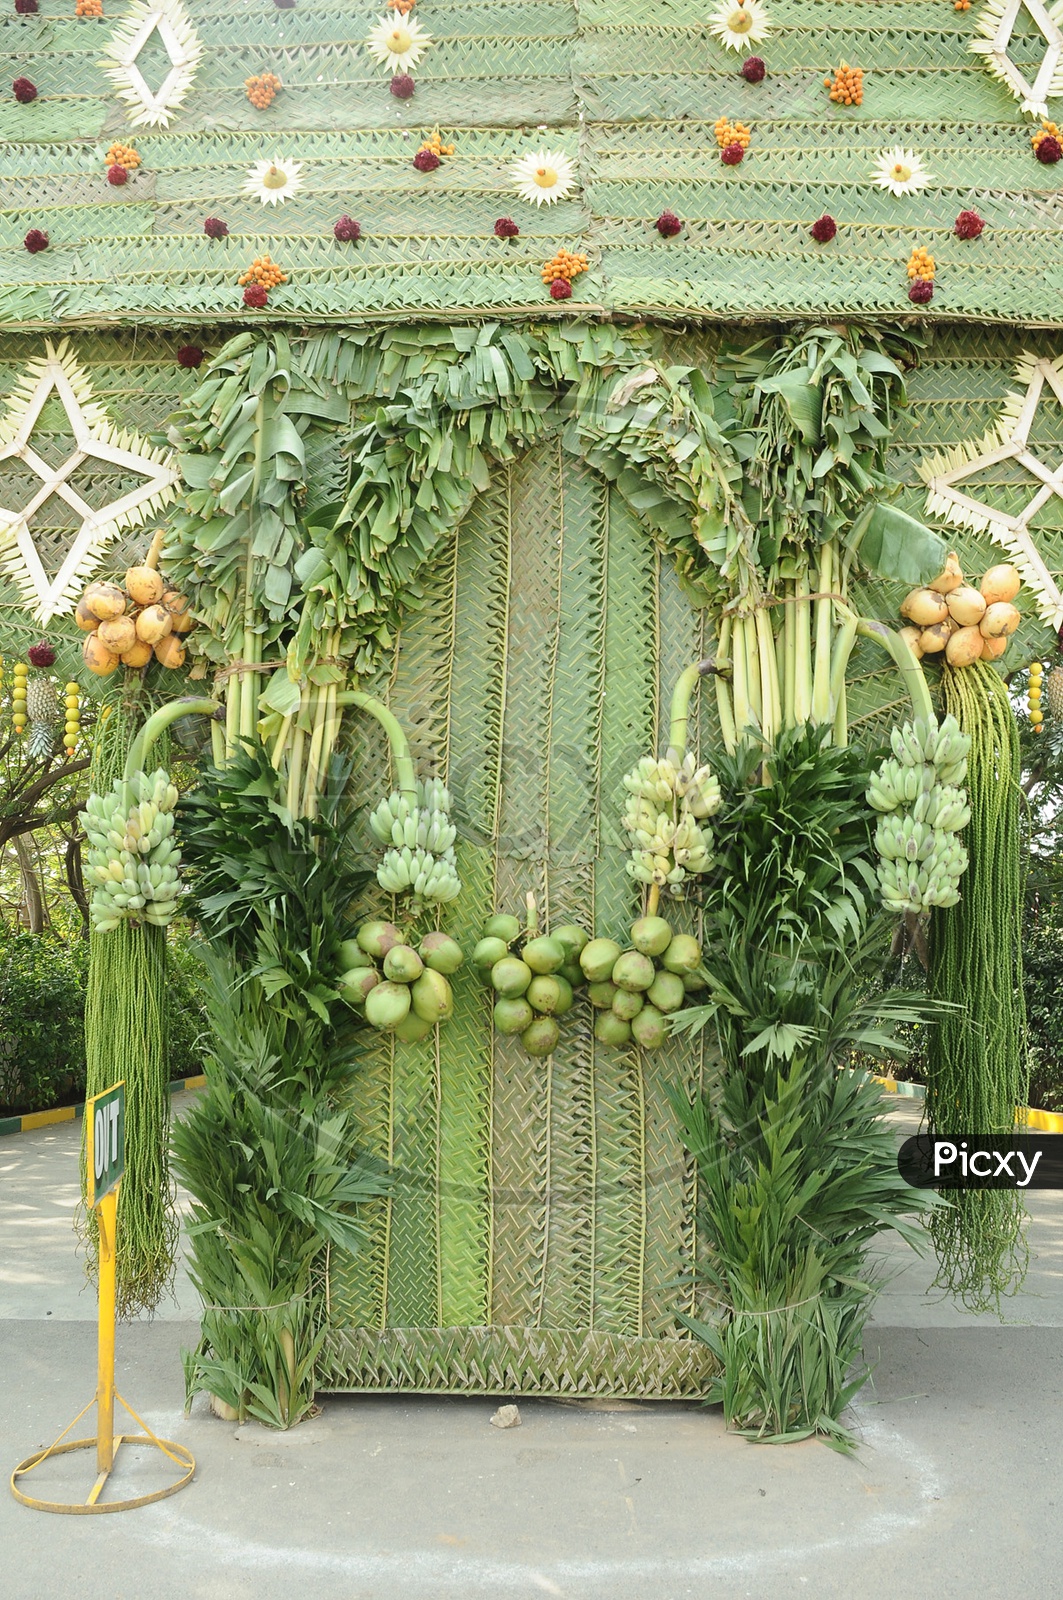 Coconuts and Bananas used for wedding decoration